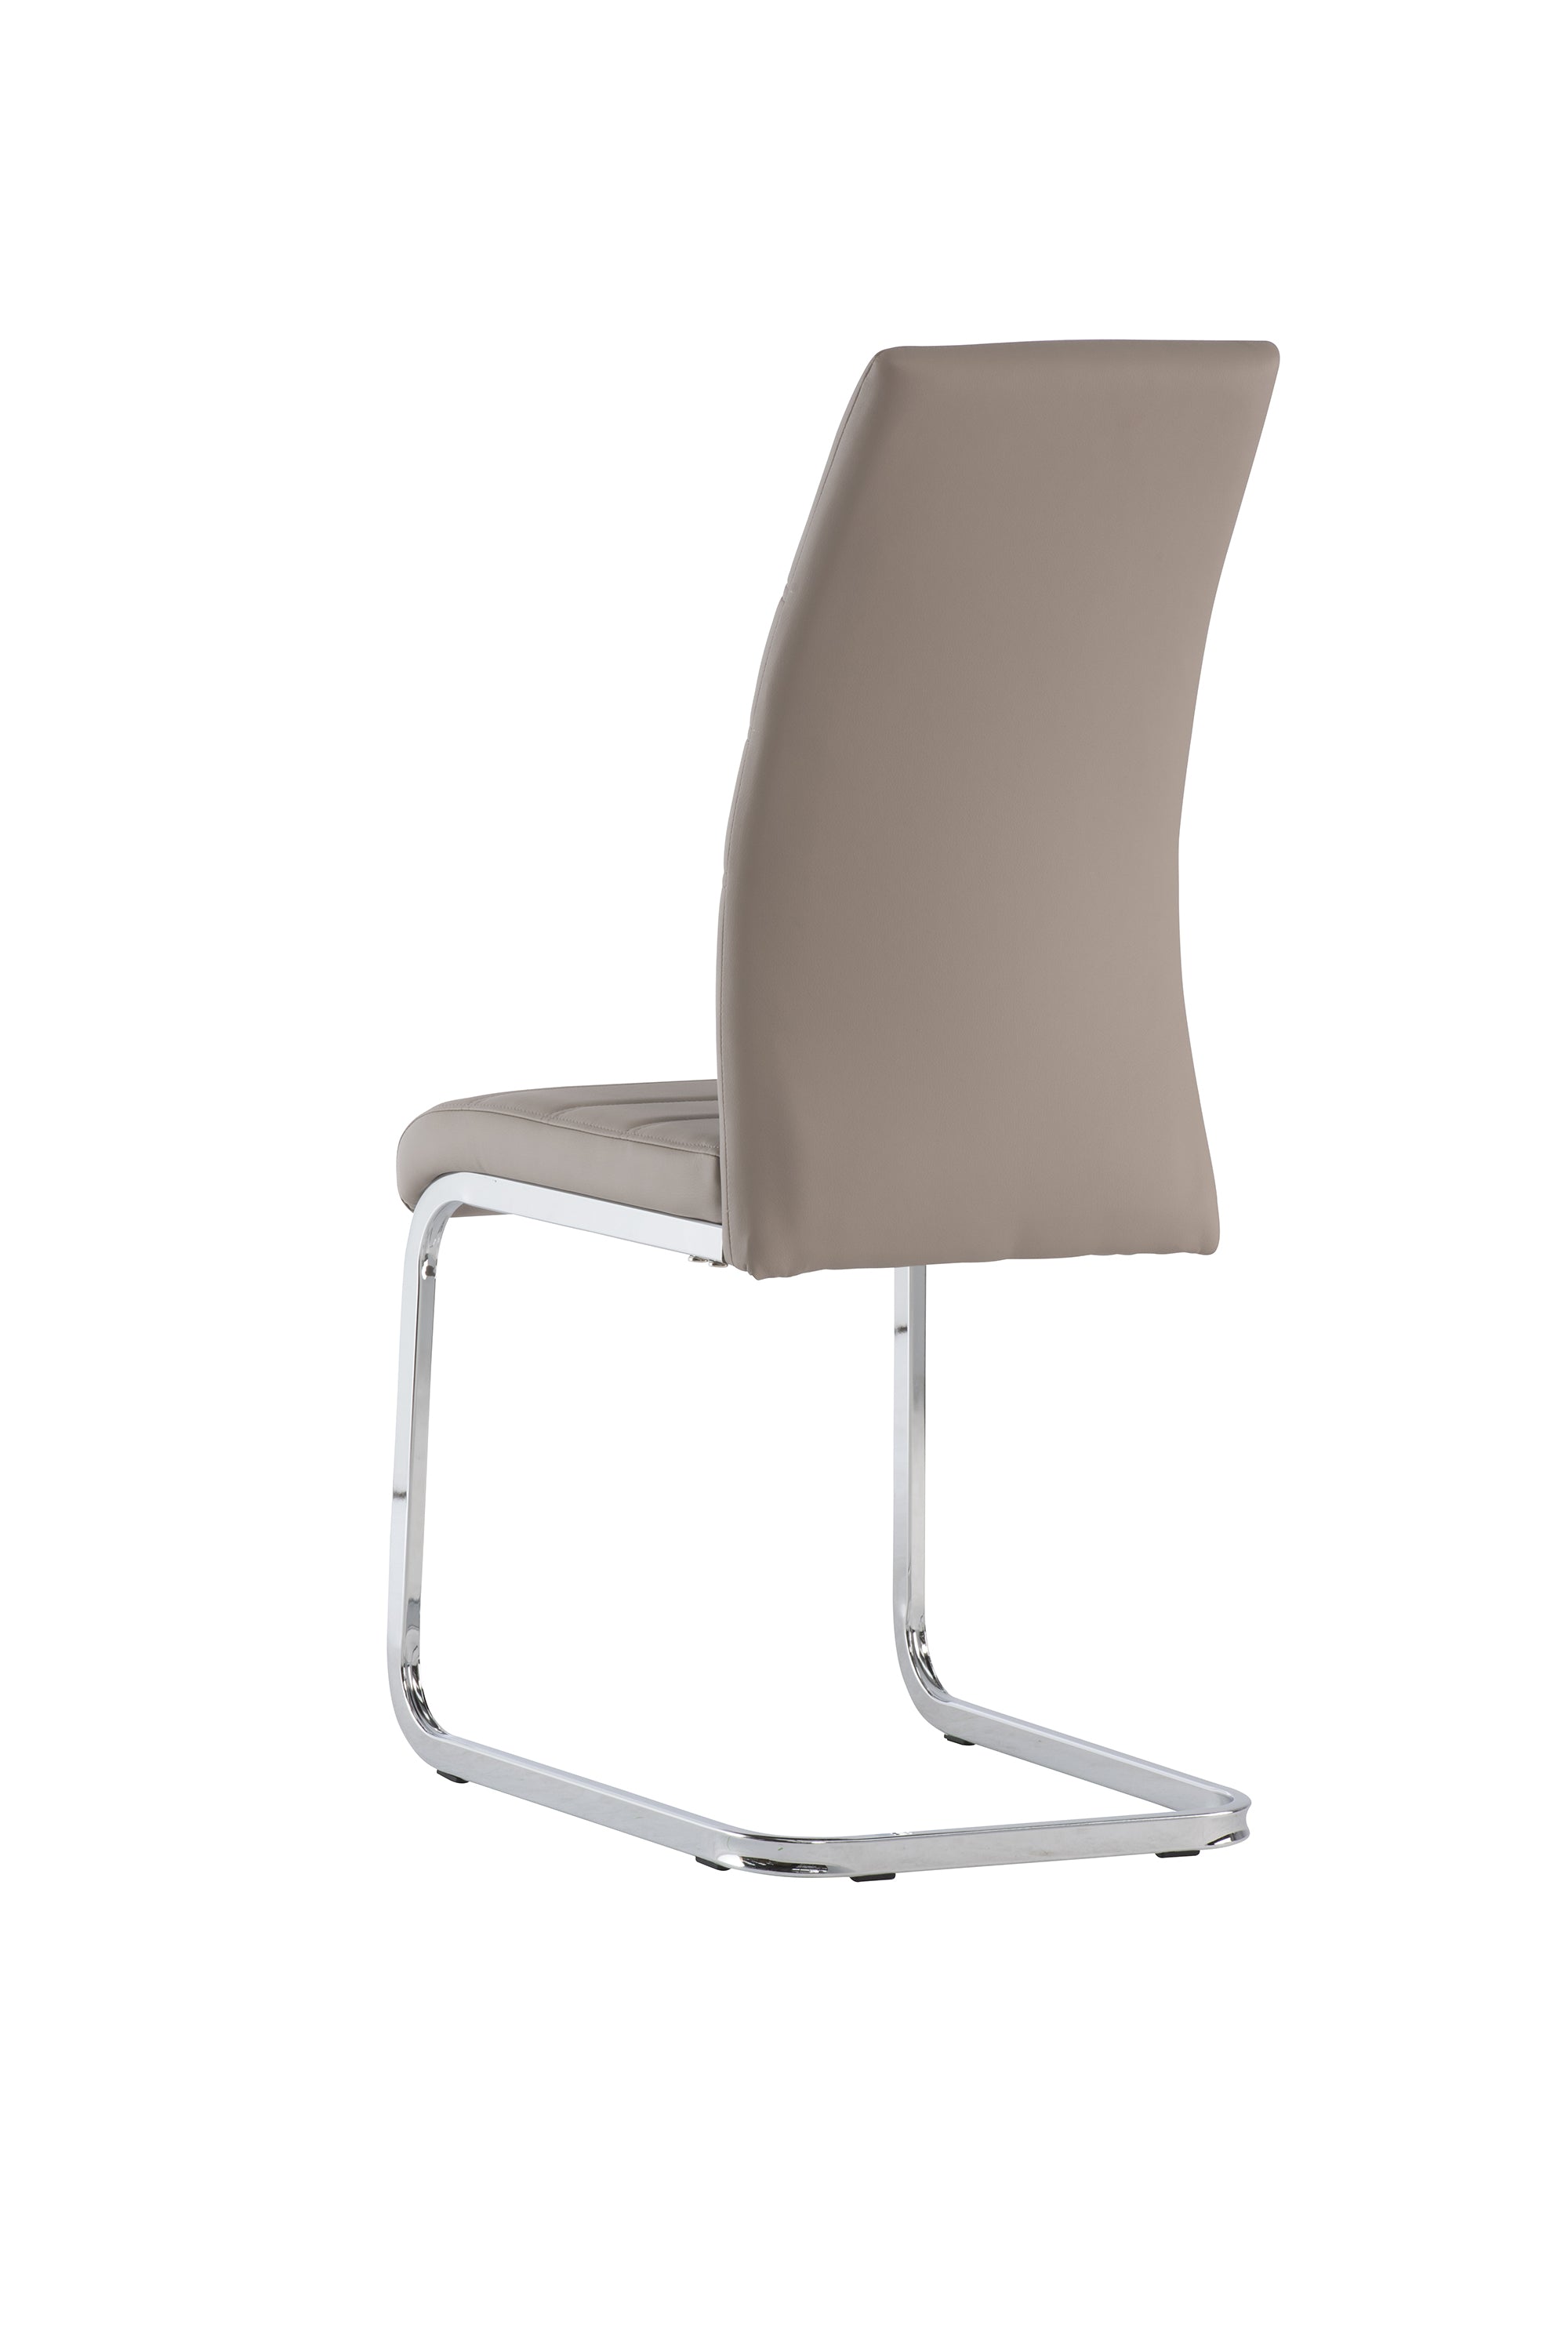 Soho Pu Cantilever Chairs (Pairs)